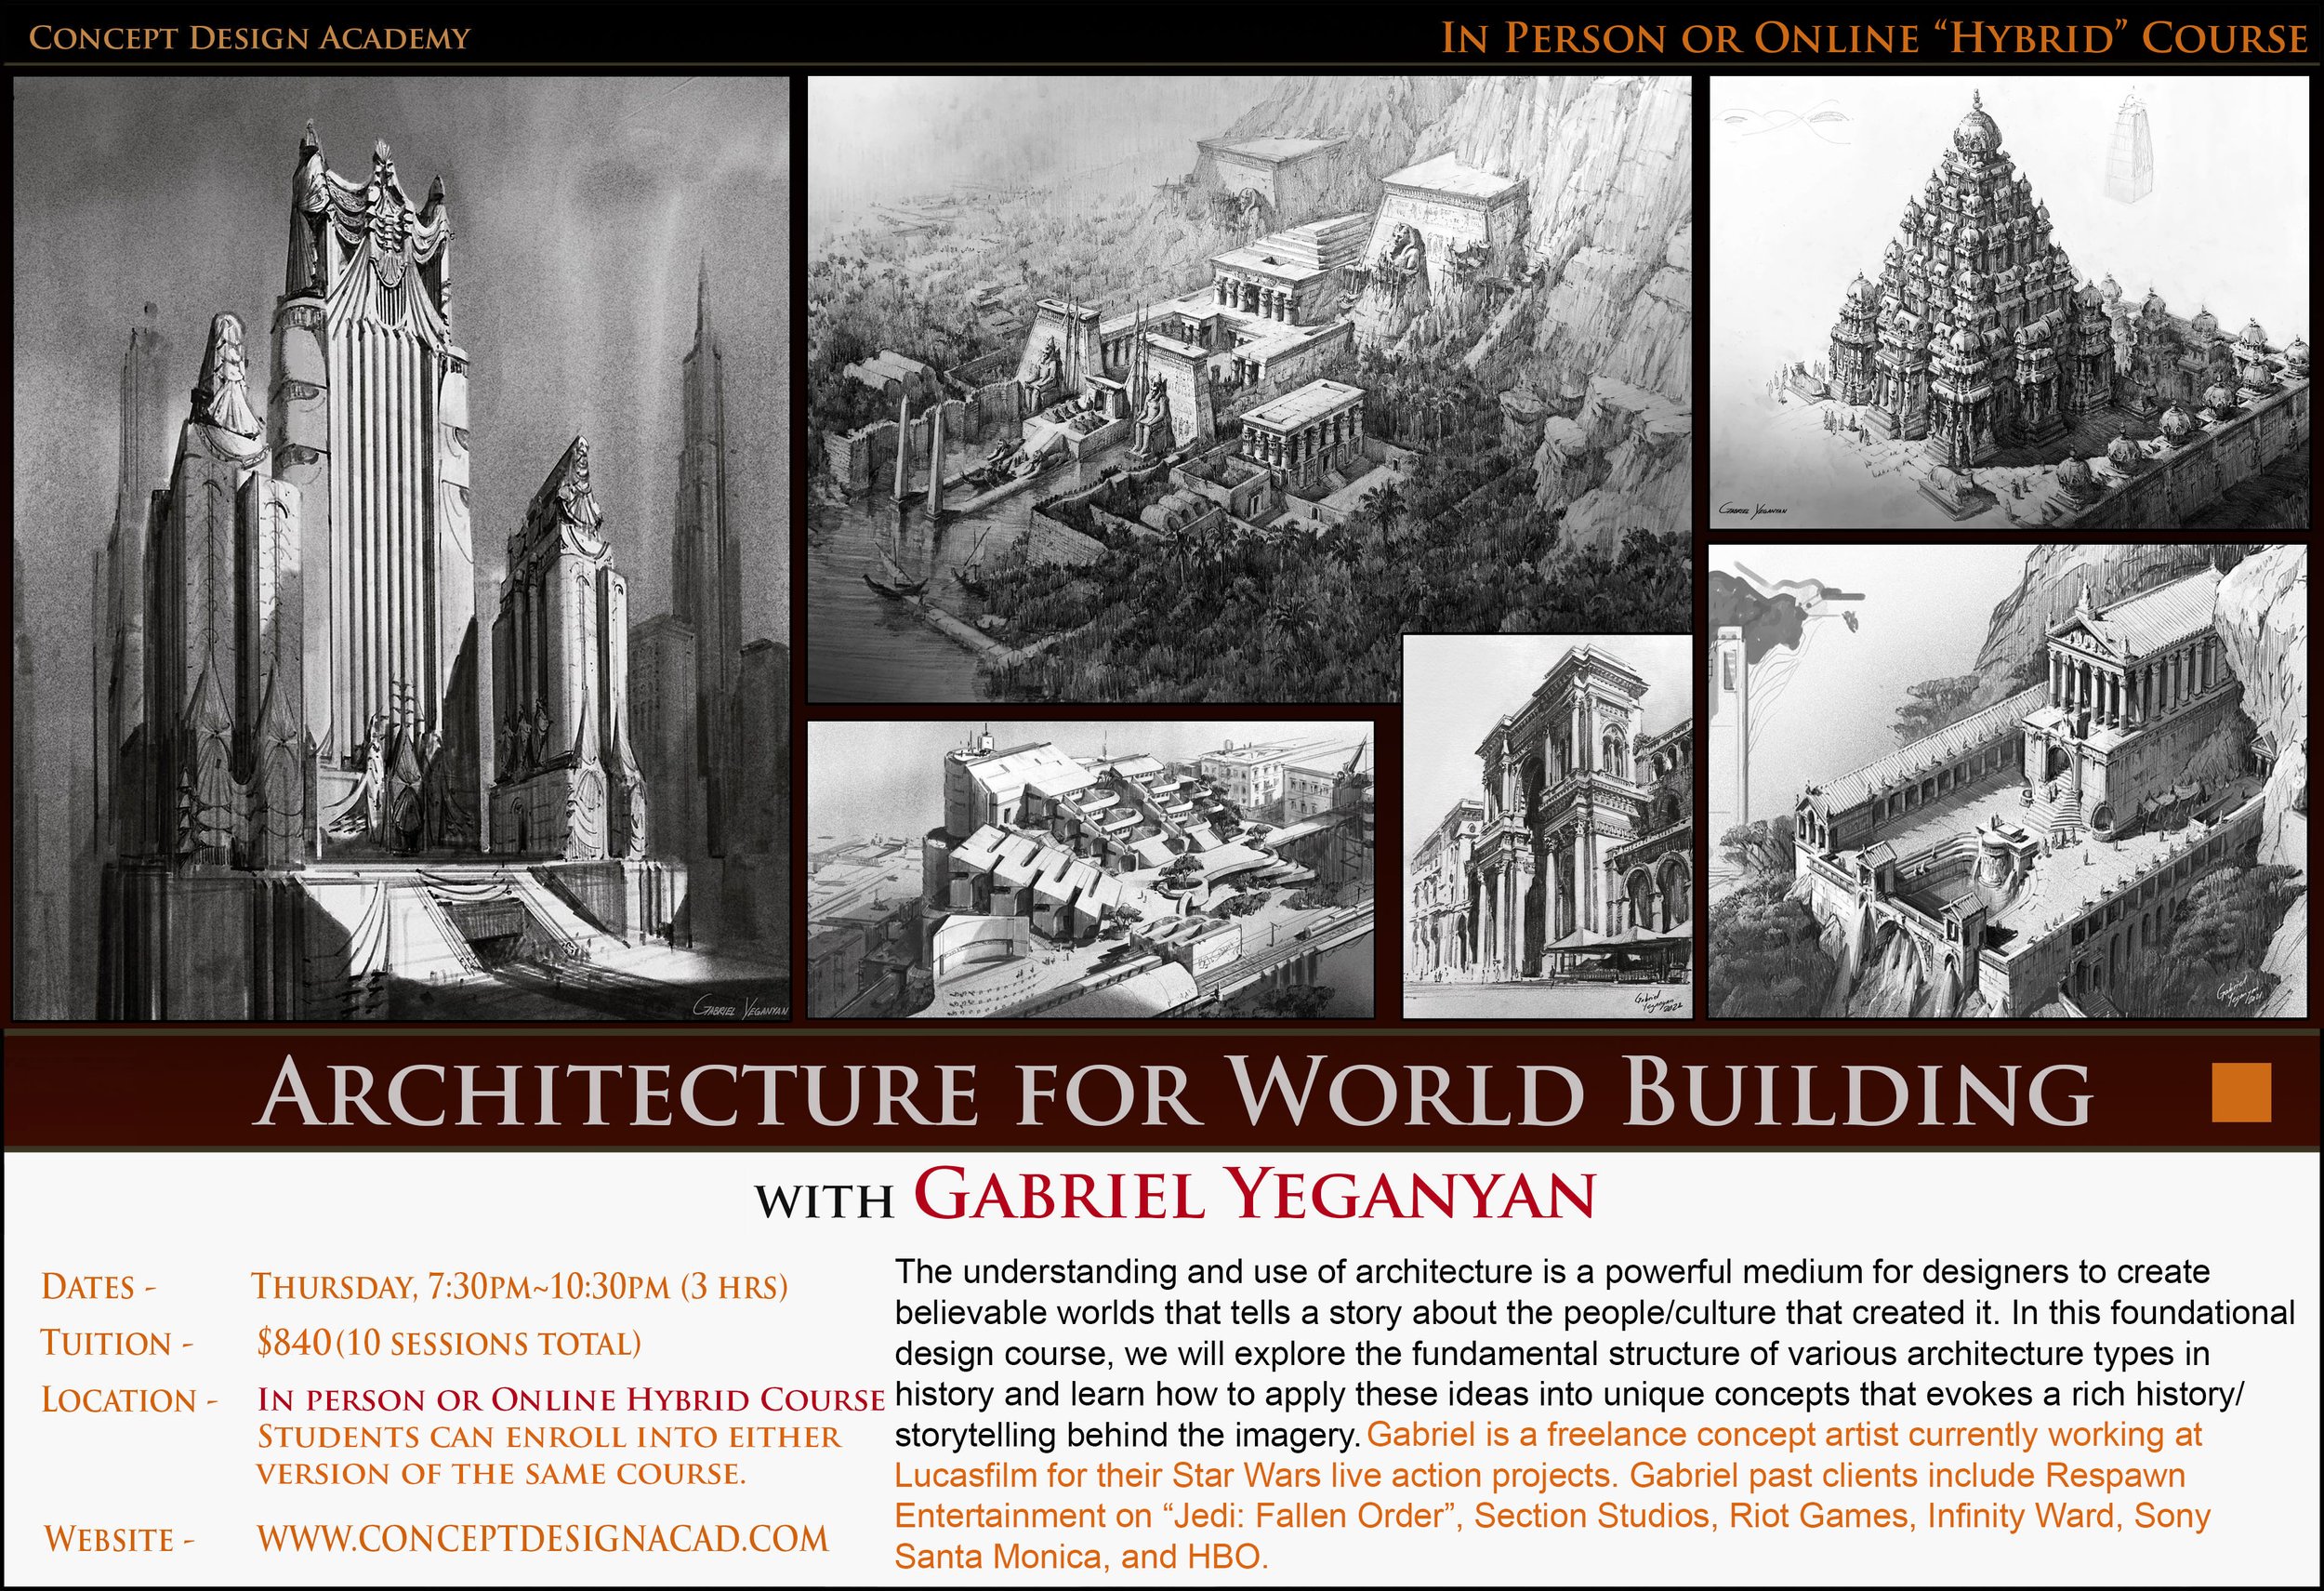 SP24 - Architecture for World Building with Gabriel Yeganyan For Website.jpg